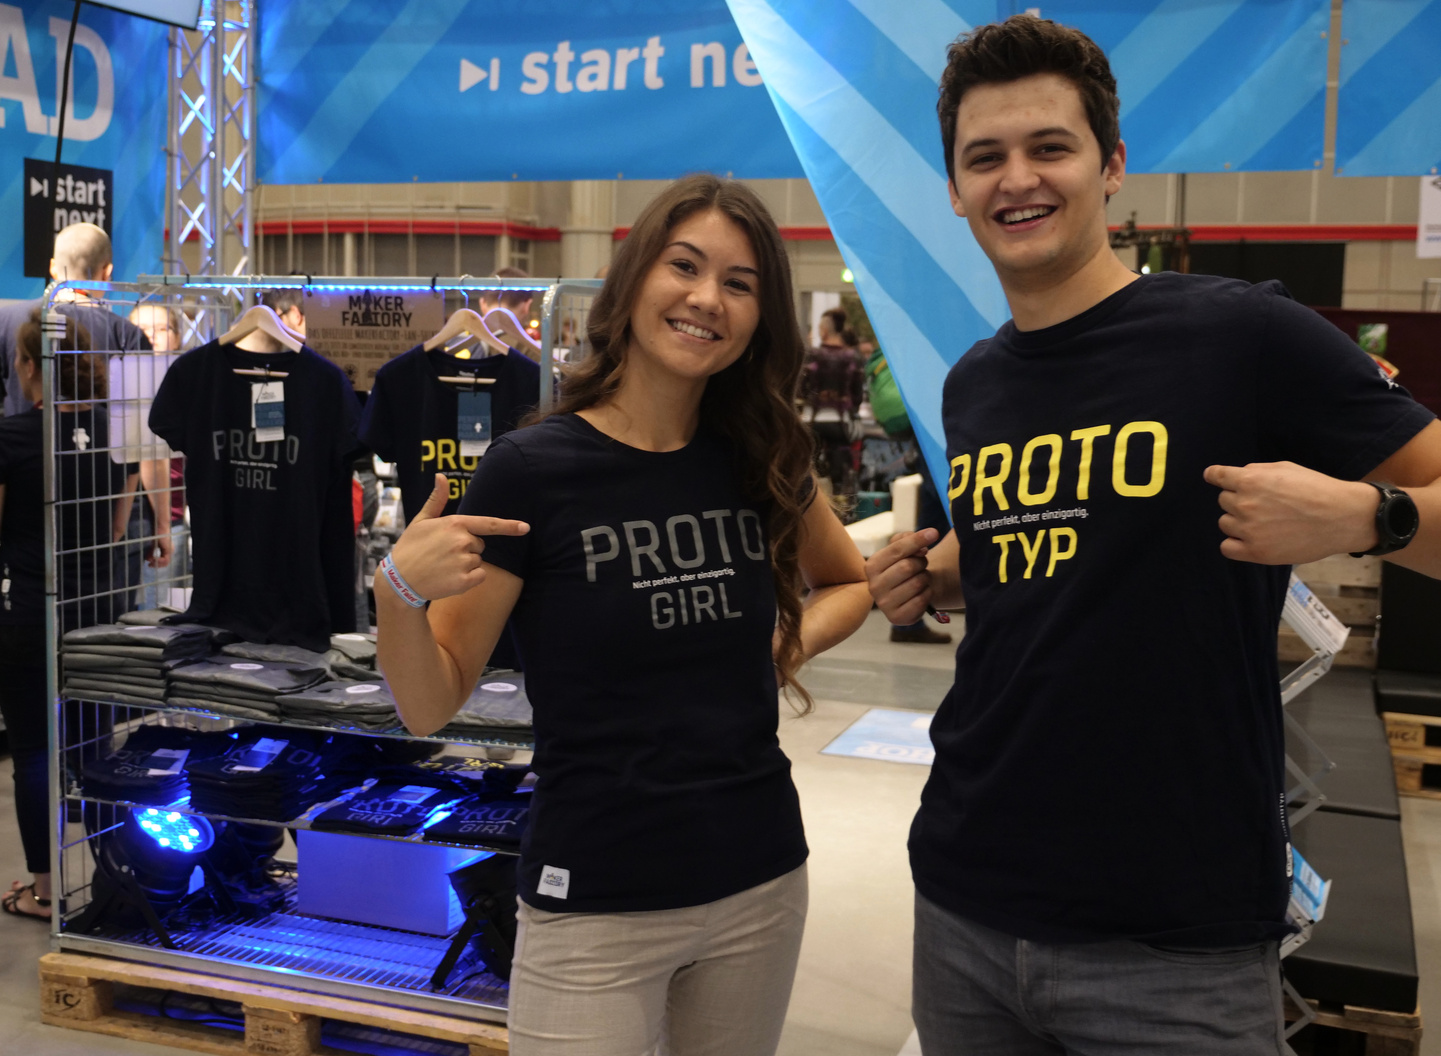 Maker Faire Hannover 2019 - Prototyp & Protogirl